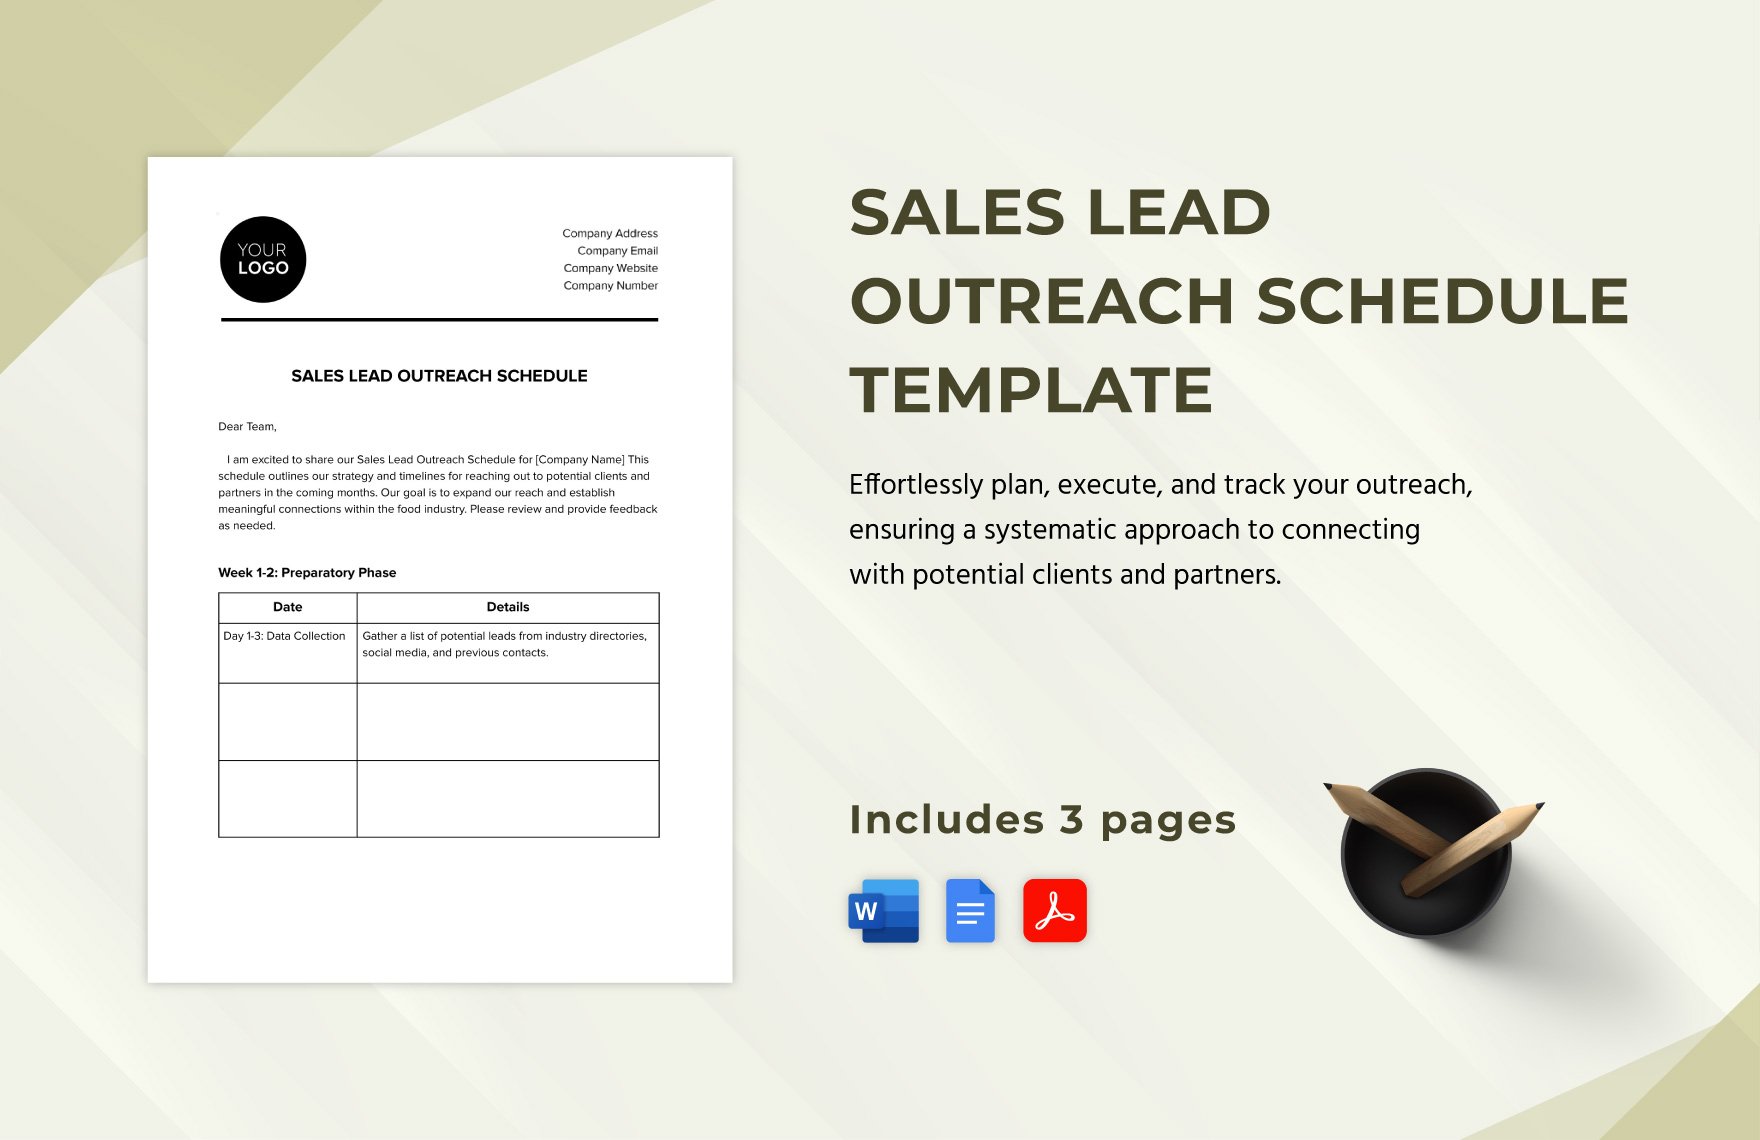 Sales Lead Outreach Schedule Template in Word, Google Docs, PDF